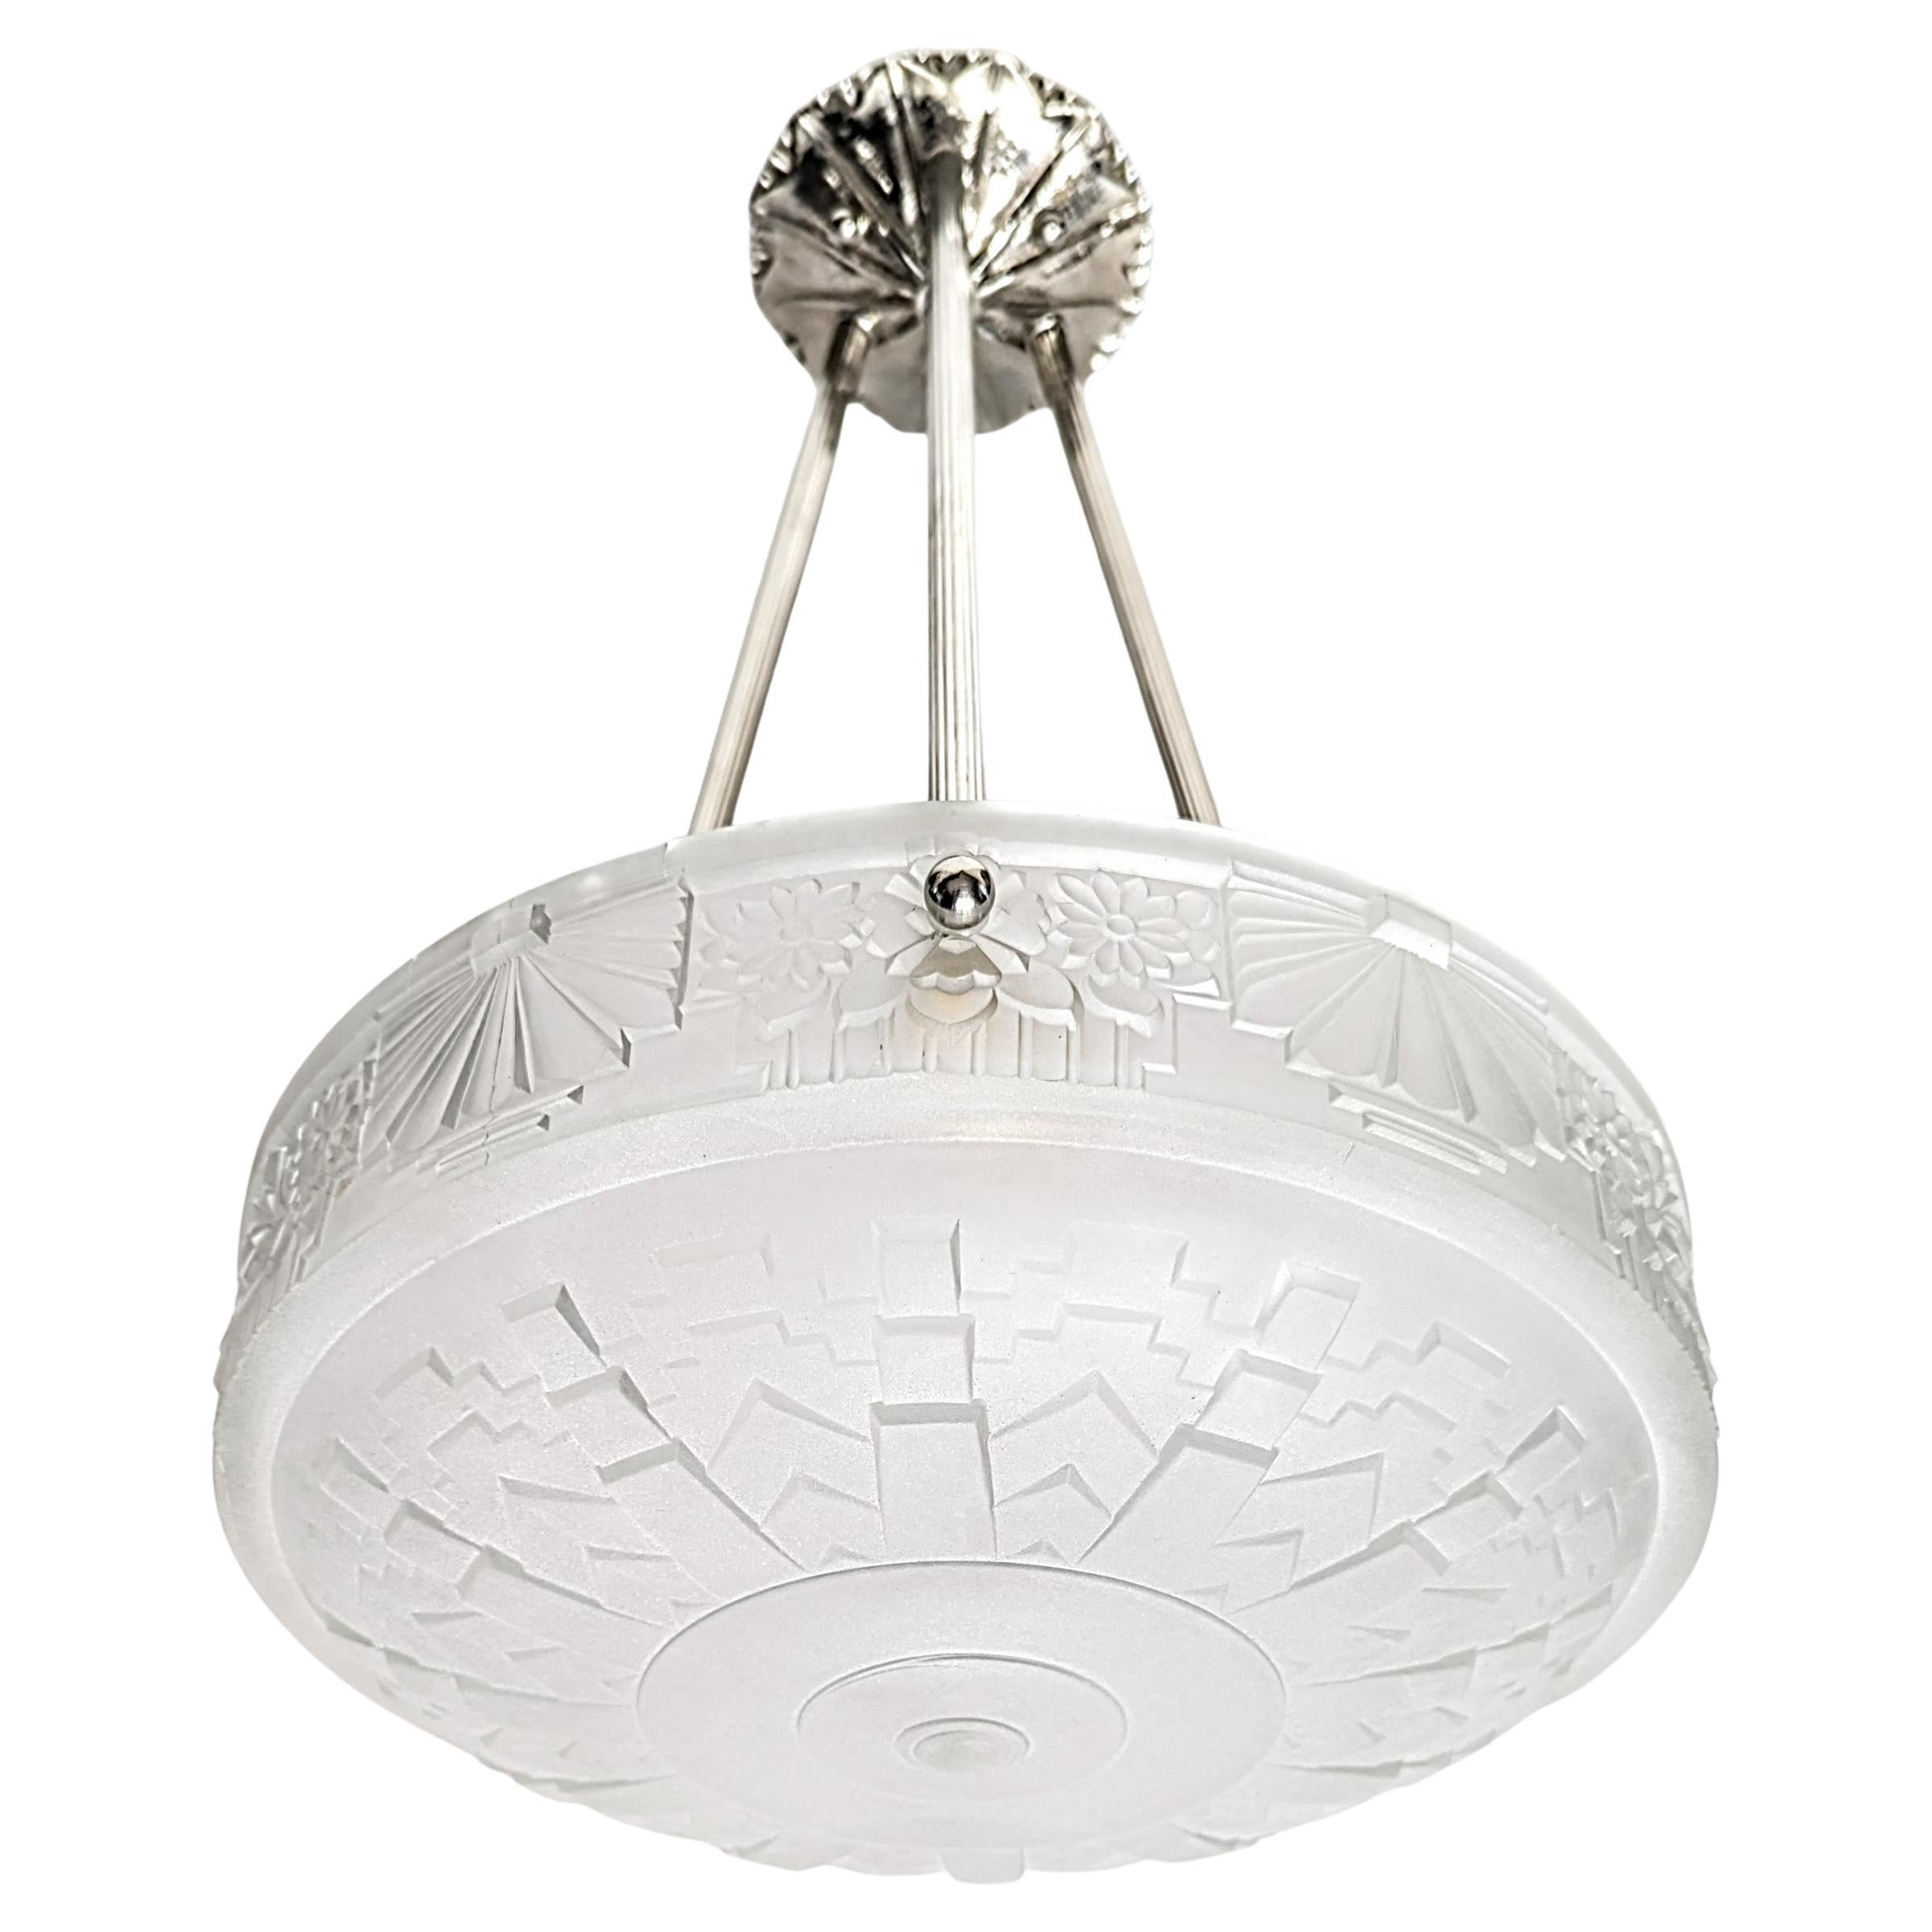 A French Art Deco pendant chandelier by 